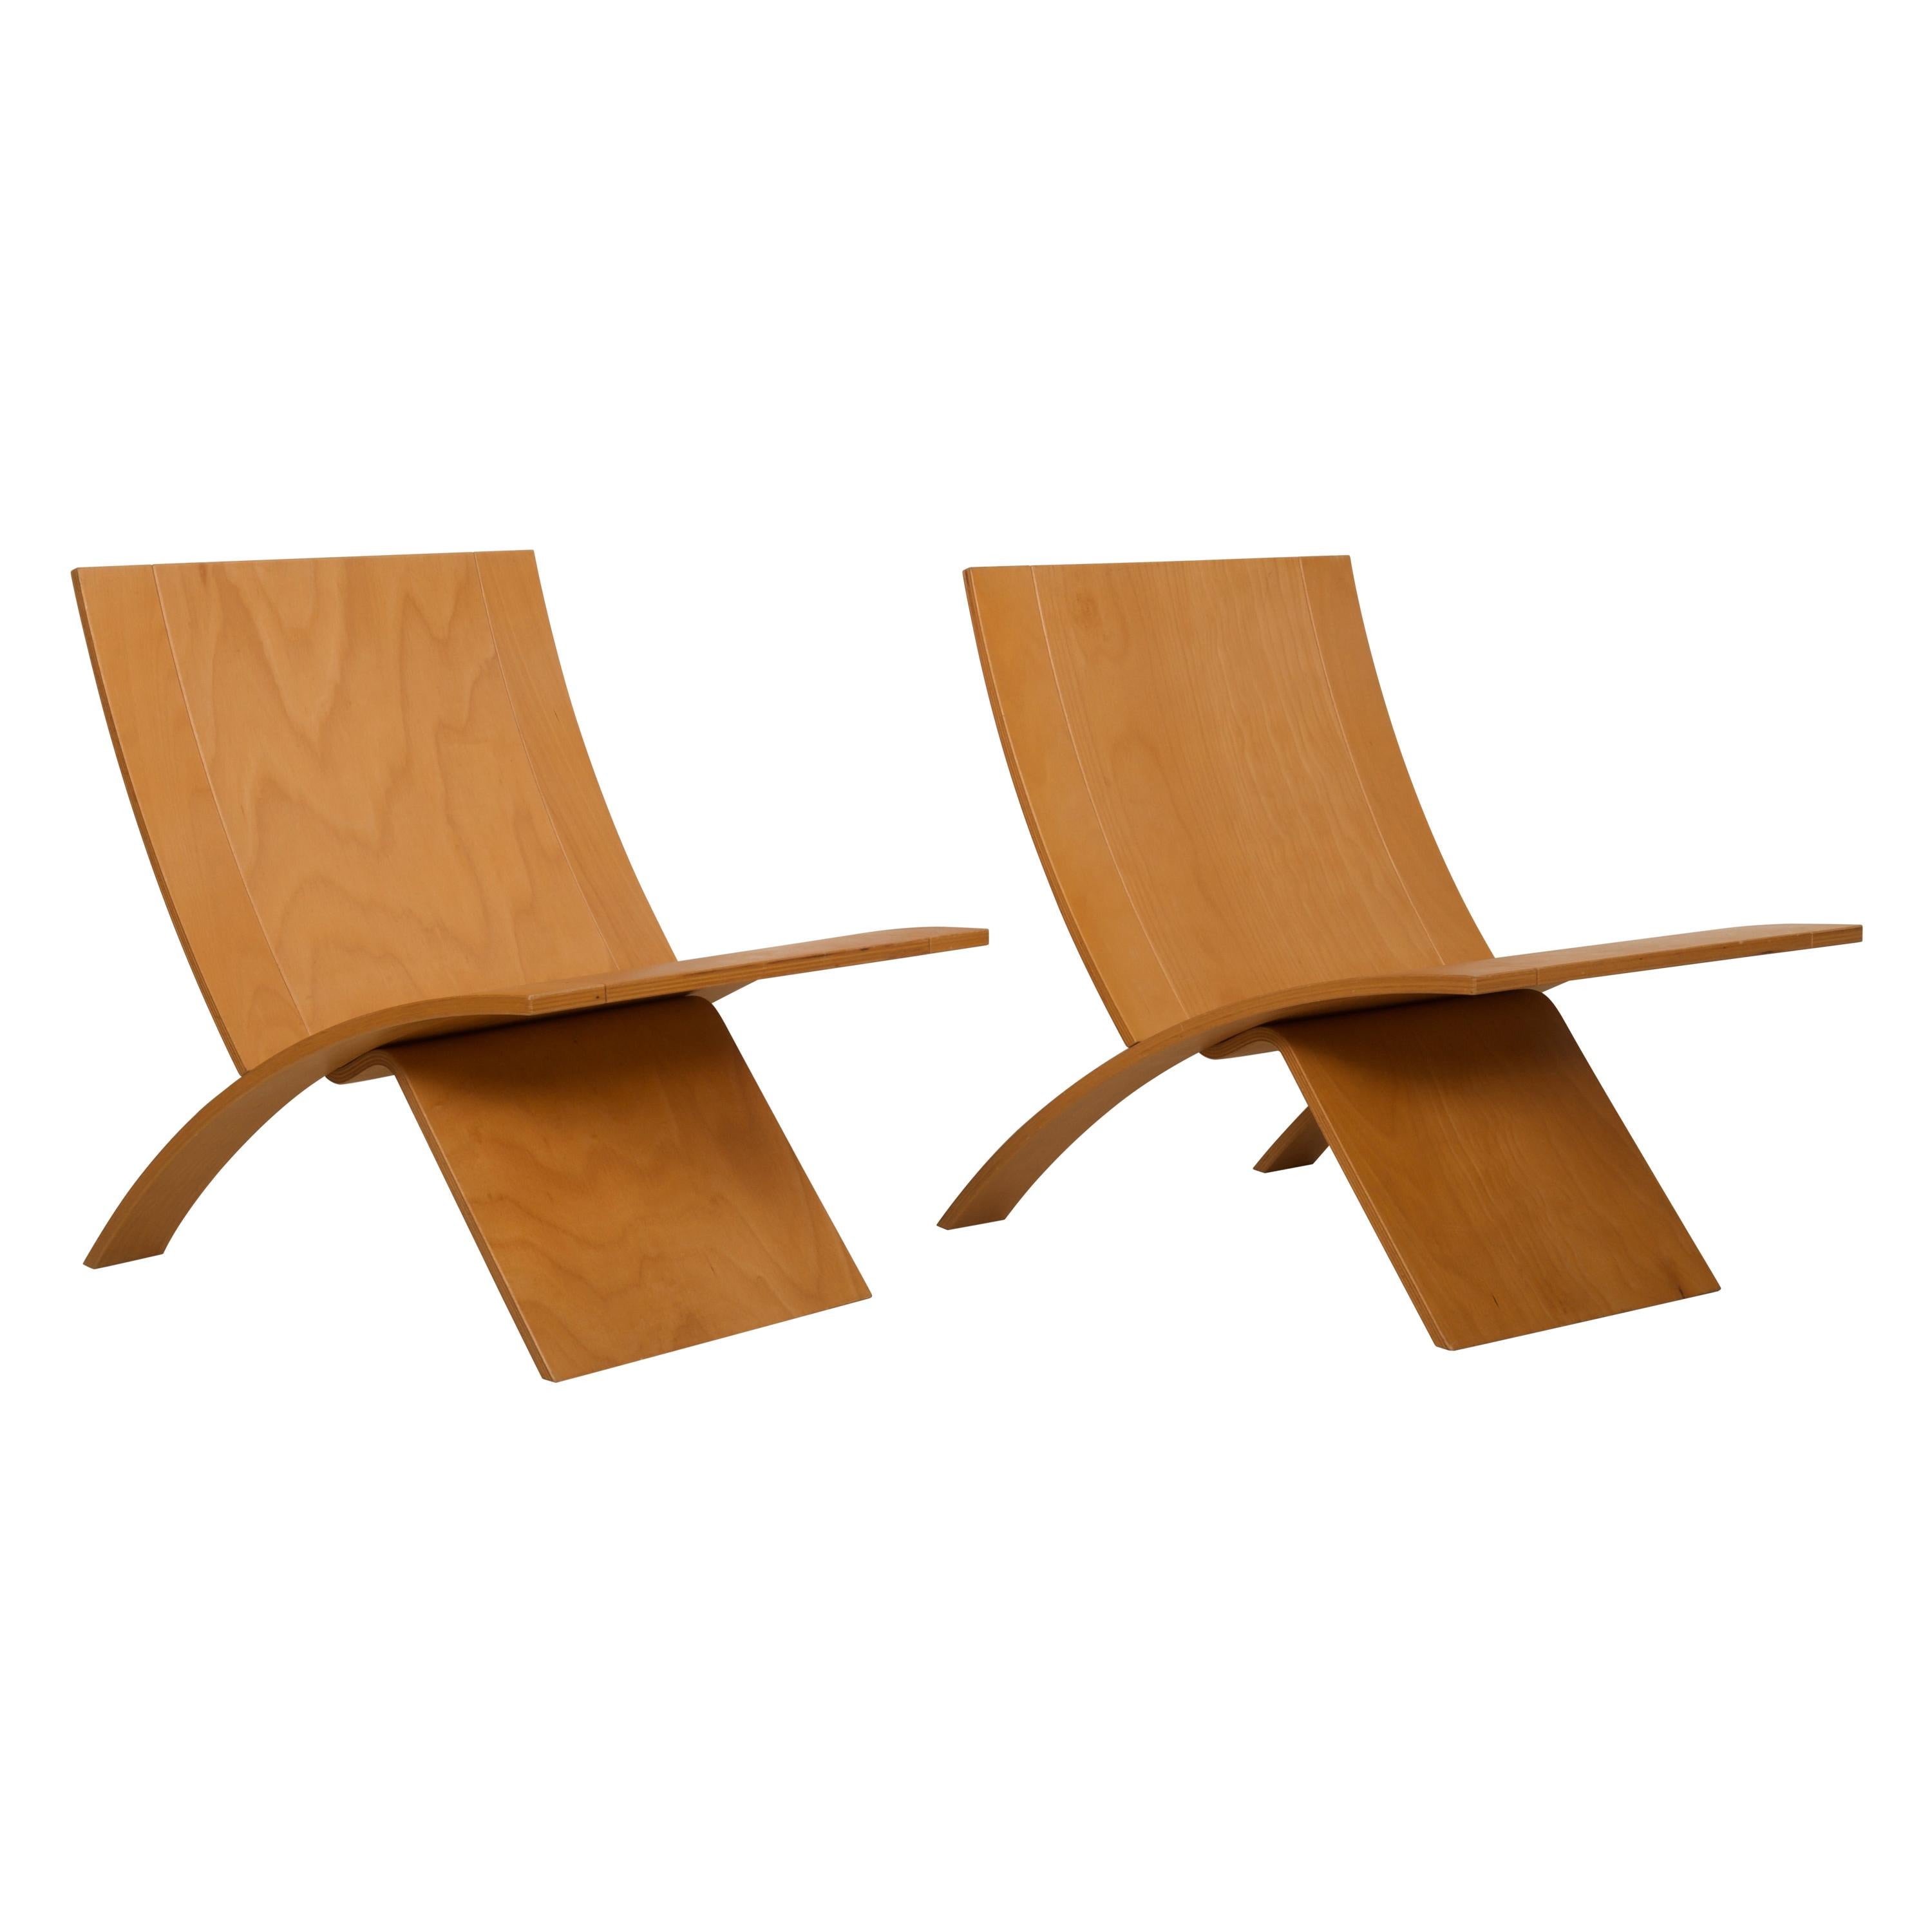 Jens Nielsen Laminex Plywood Lounge Chairs Westnofa For Sale